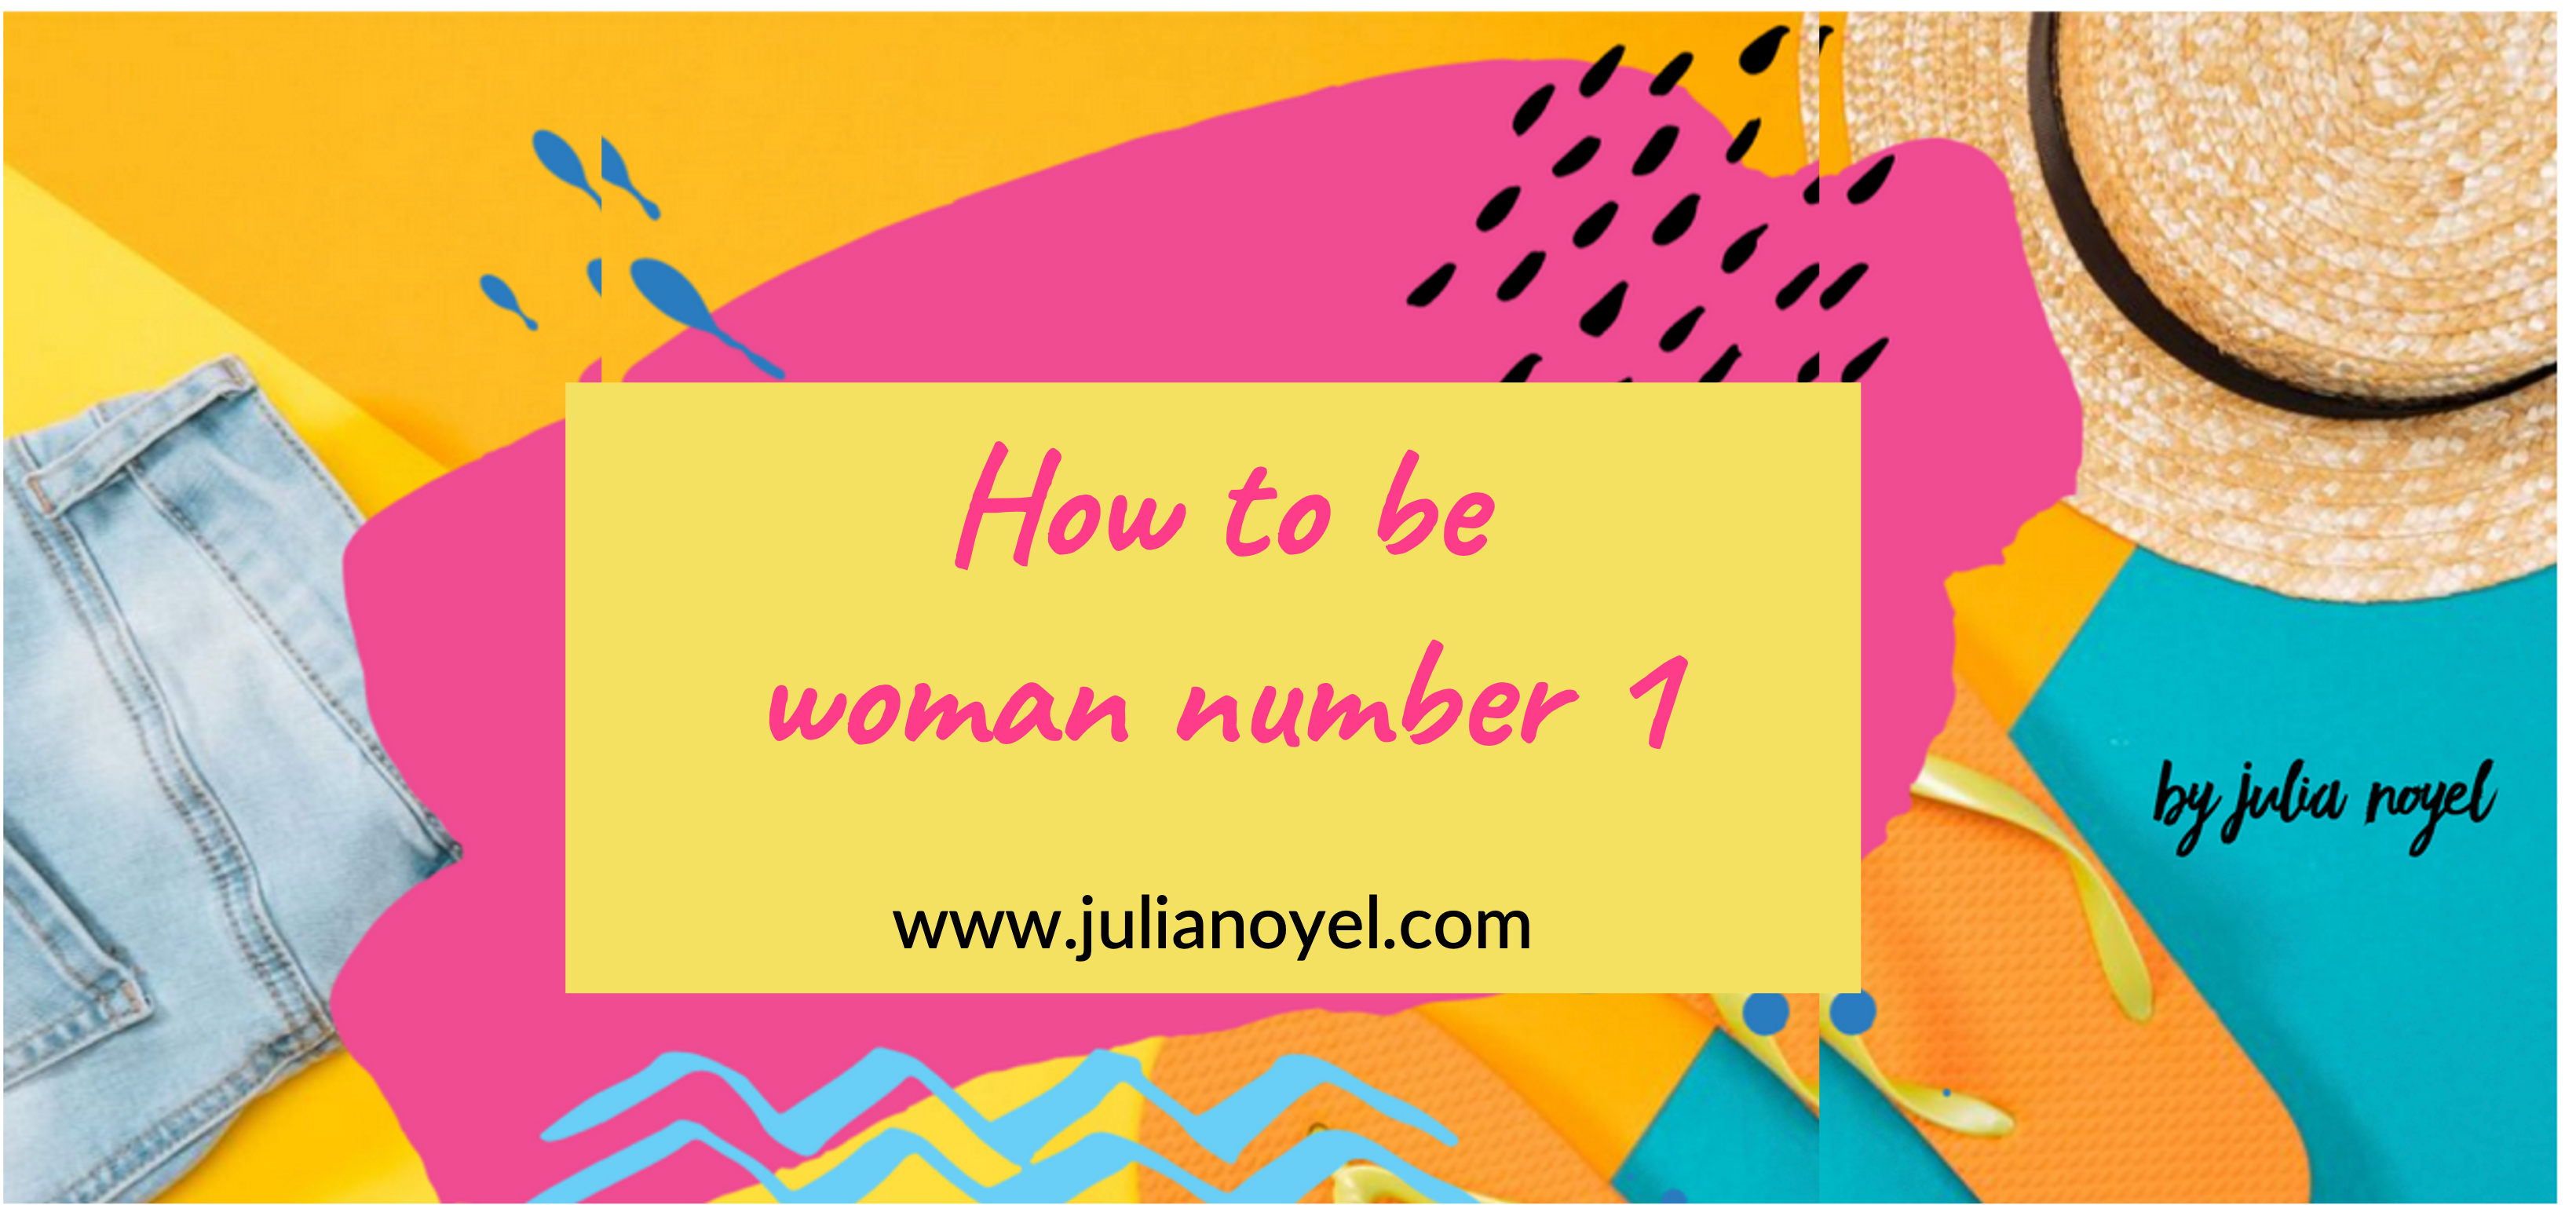 How to be woman number 1 by Julia Noyel